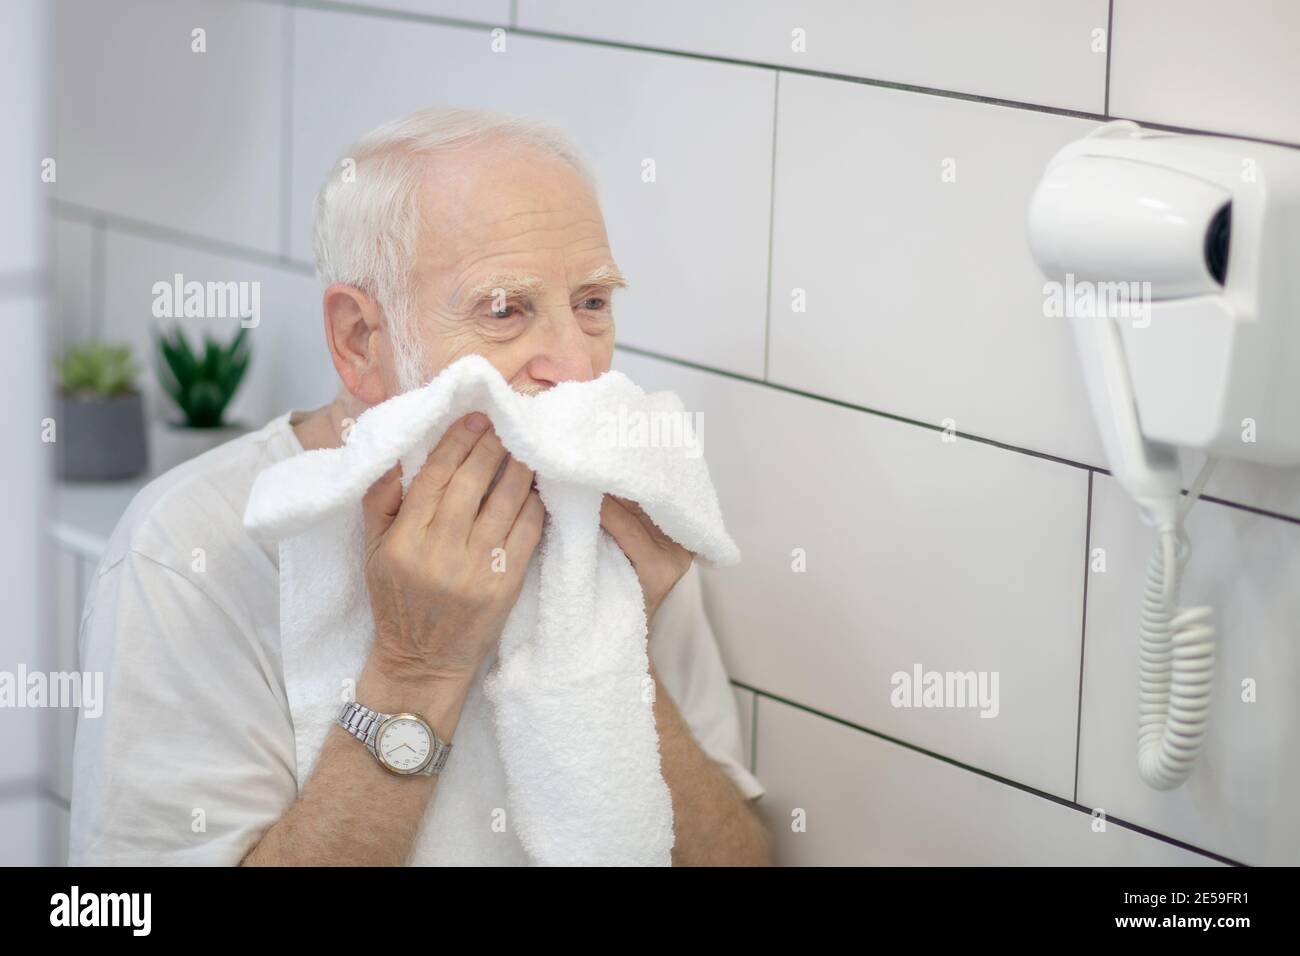 Gray-haired man in white tshirt wiping his face with the towel Stock Photo